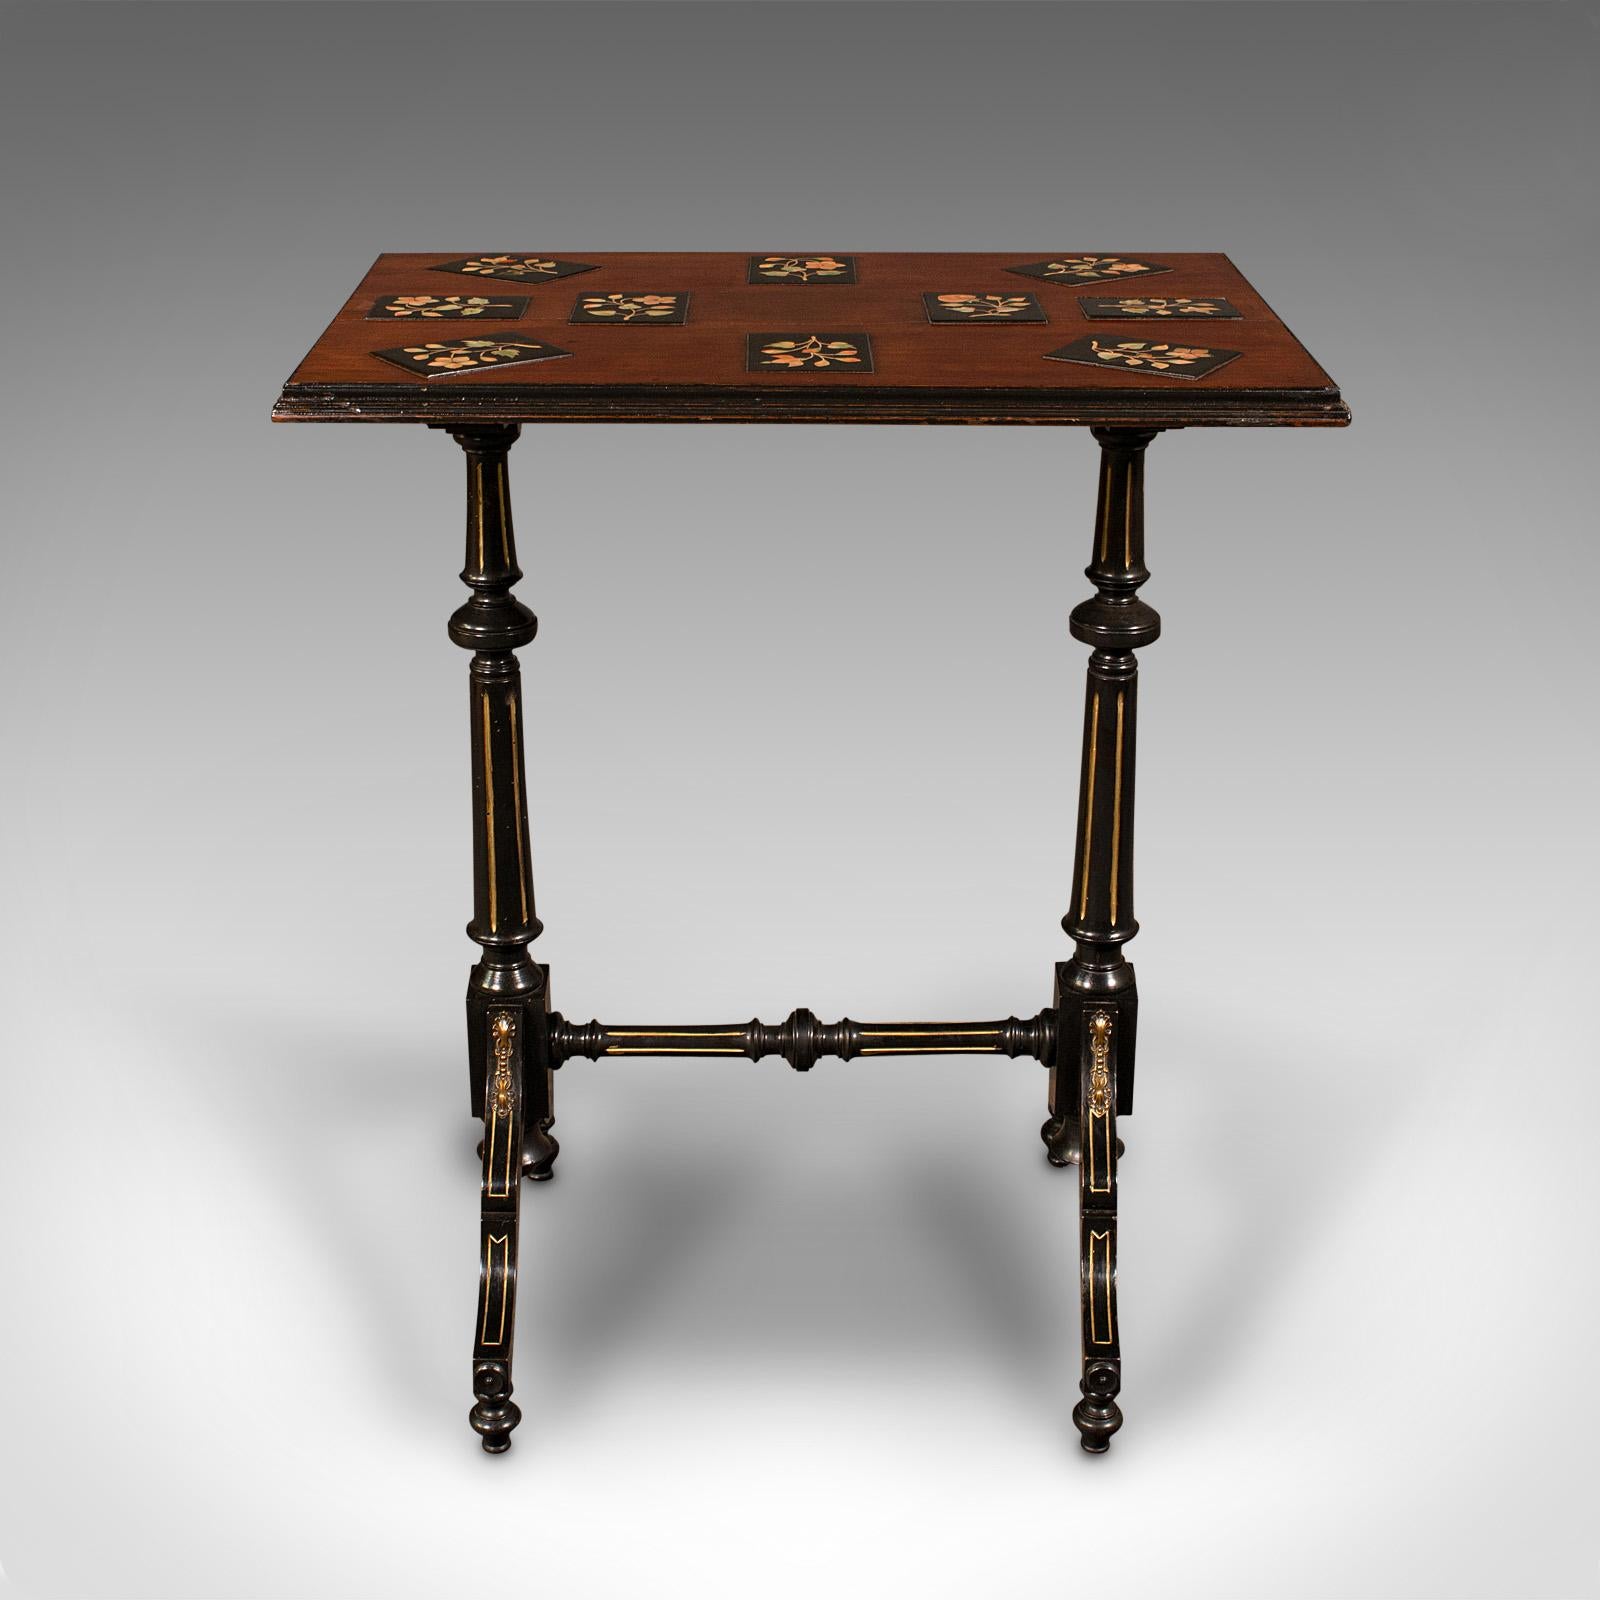 This is an antique specimen table. An English, mahogany and marble inlaid occasional table with Aesthetic period taste, dating to the Victorian era, circa 1880.

Fascinating inlaid top over a wonderfully Gillows-esque base
Displays a desirable